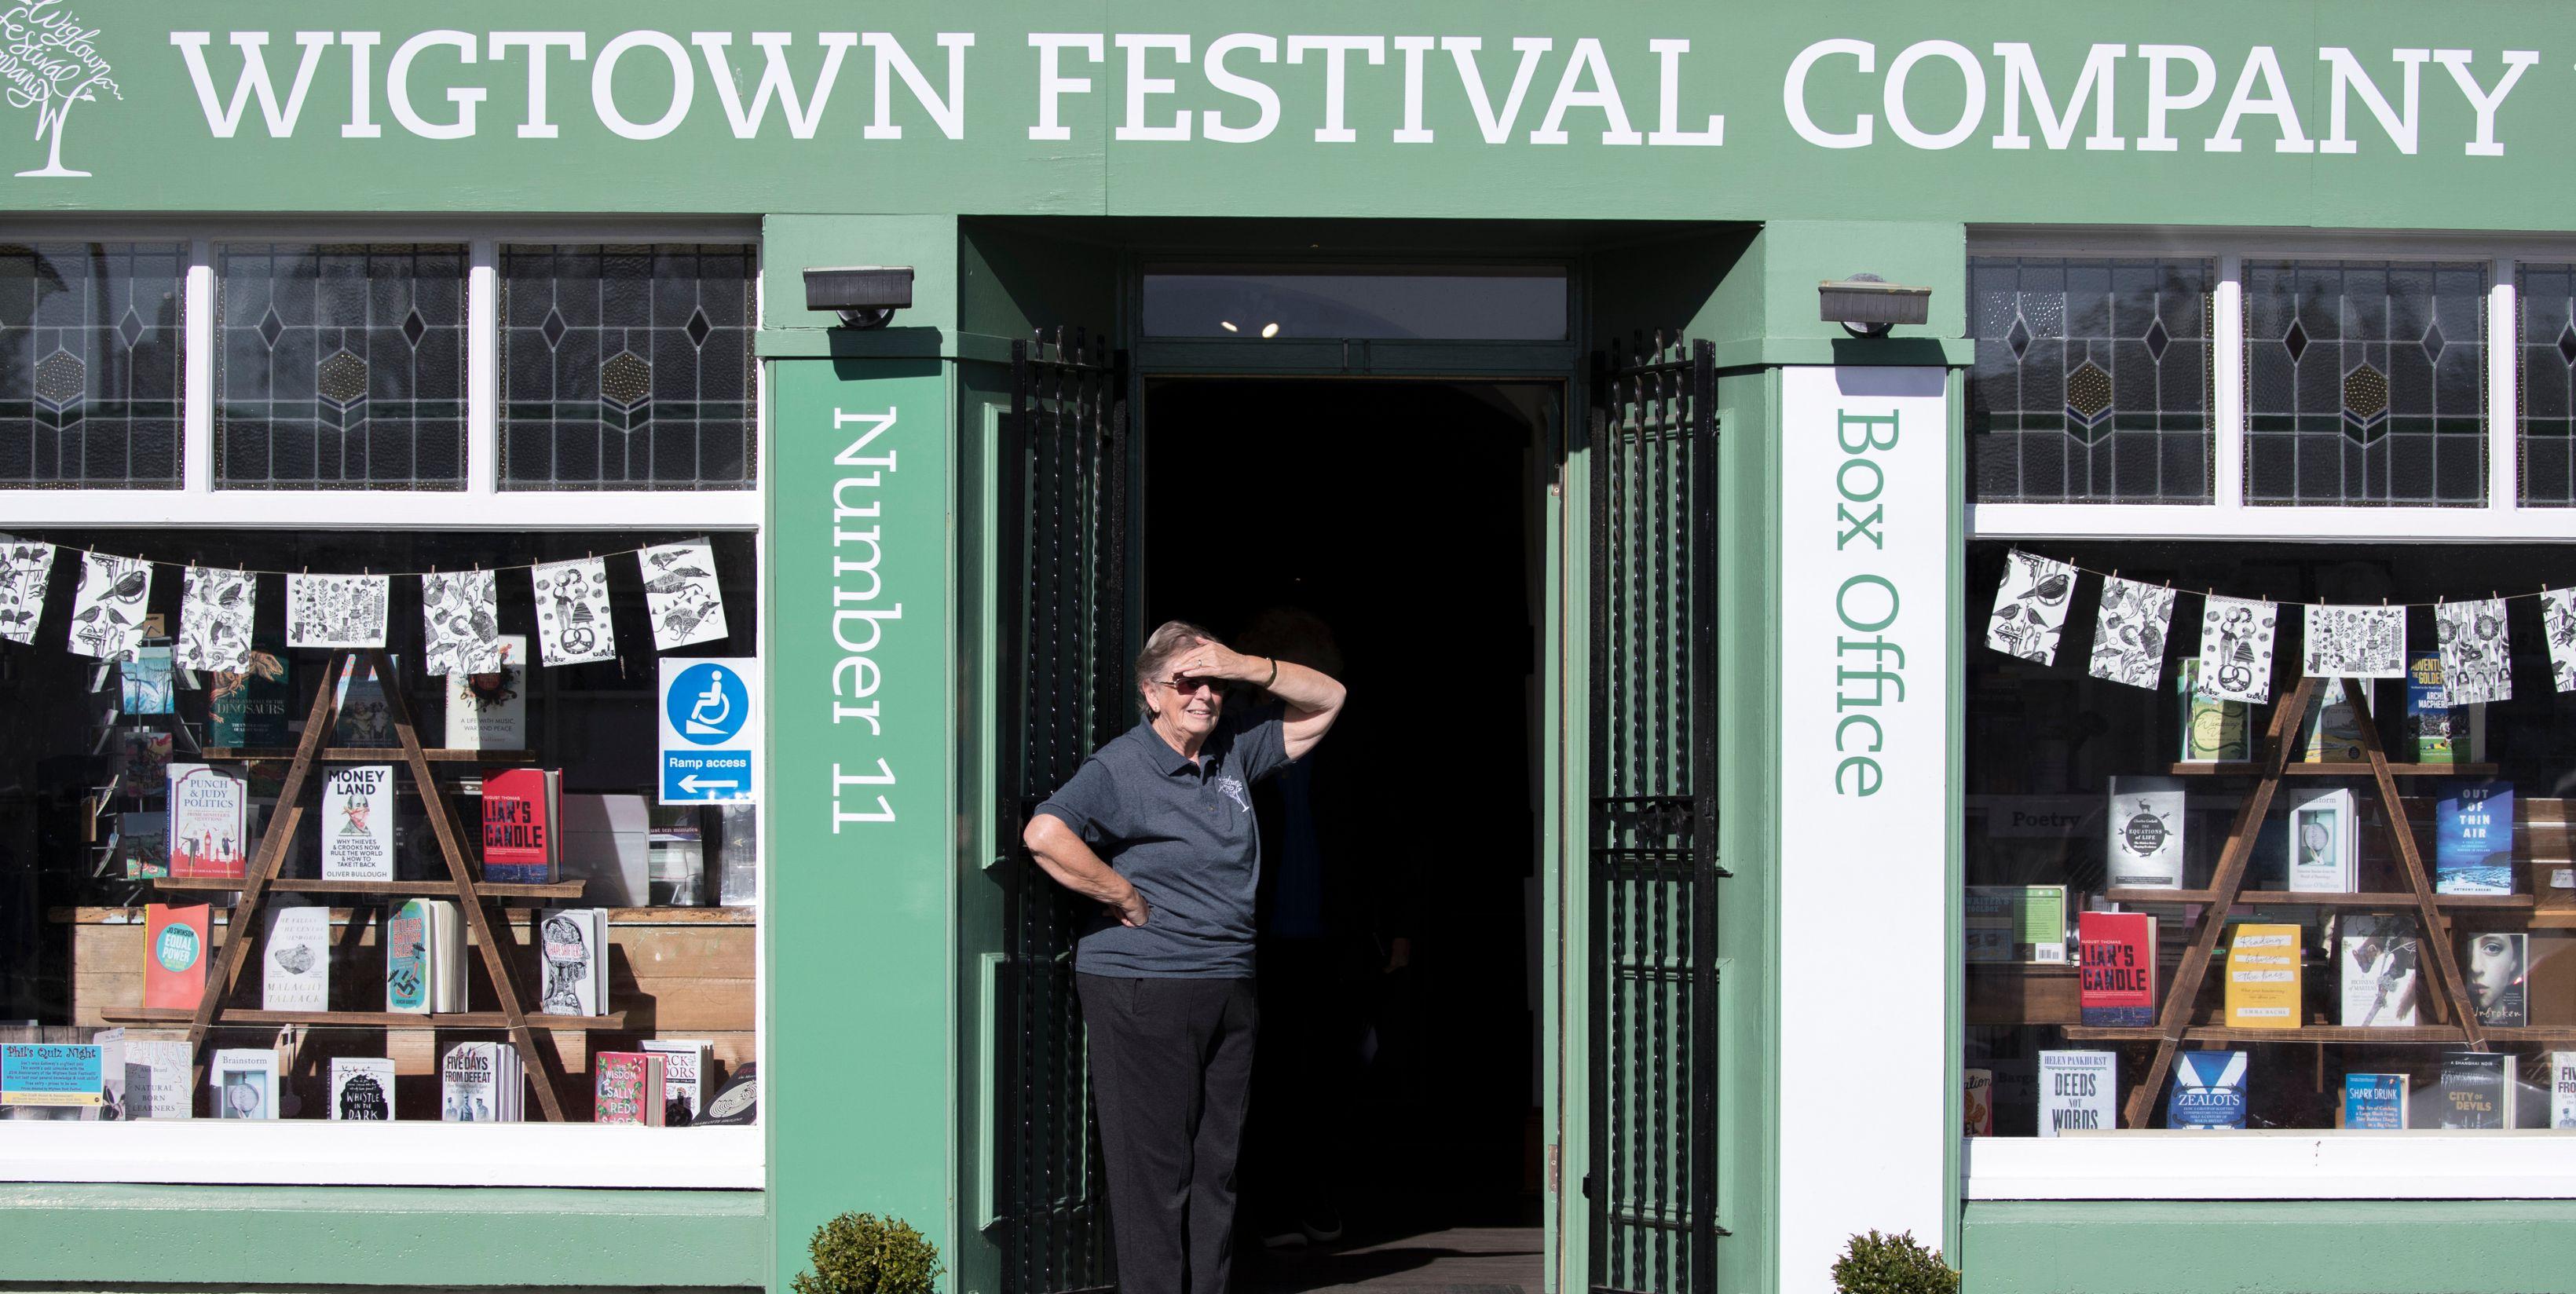 Wigtown Festival Company bookshop and box office. The windows are dressed with books and bunting. A volunteer looks out of the door with their hand shielding their eyes from the sunshine.